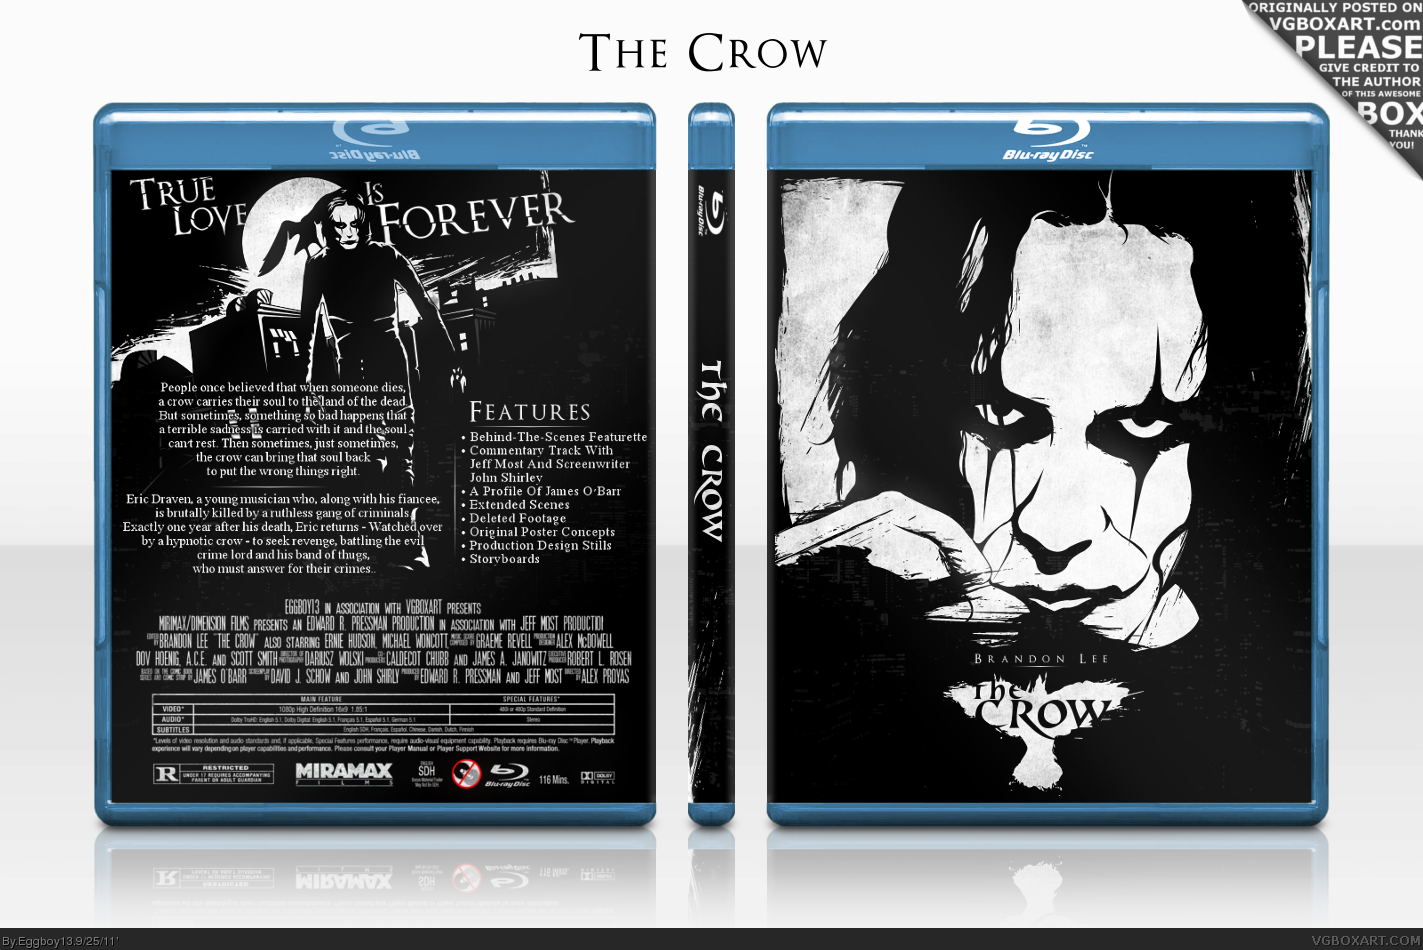 The Crow box cover